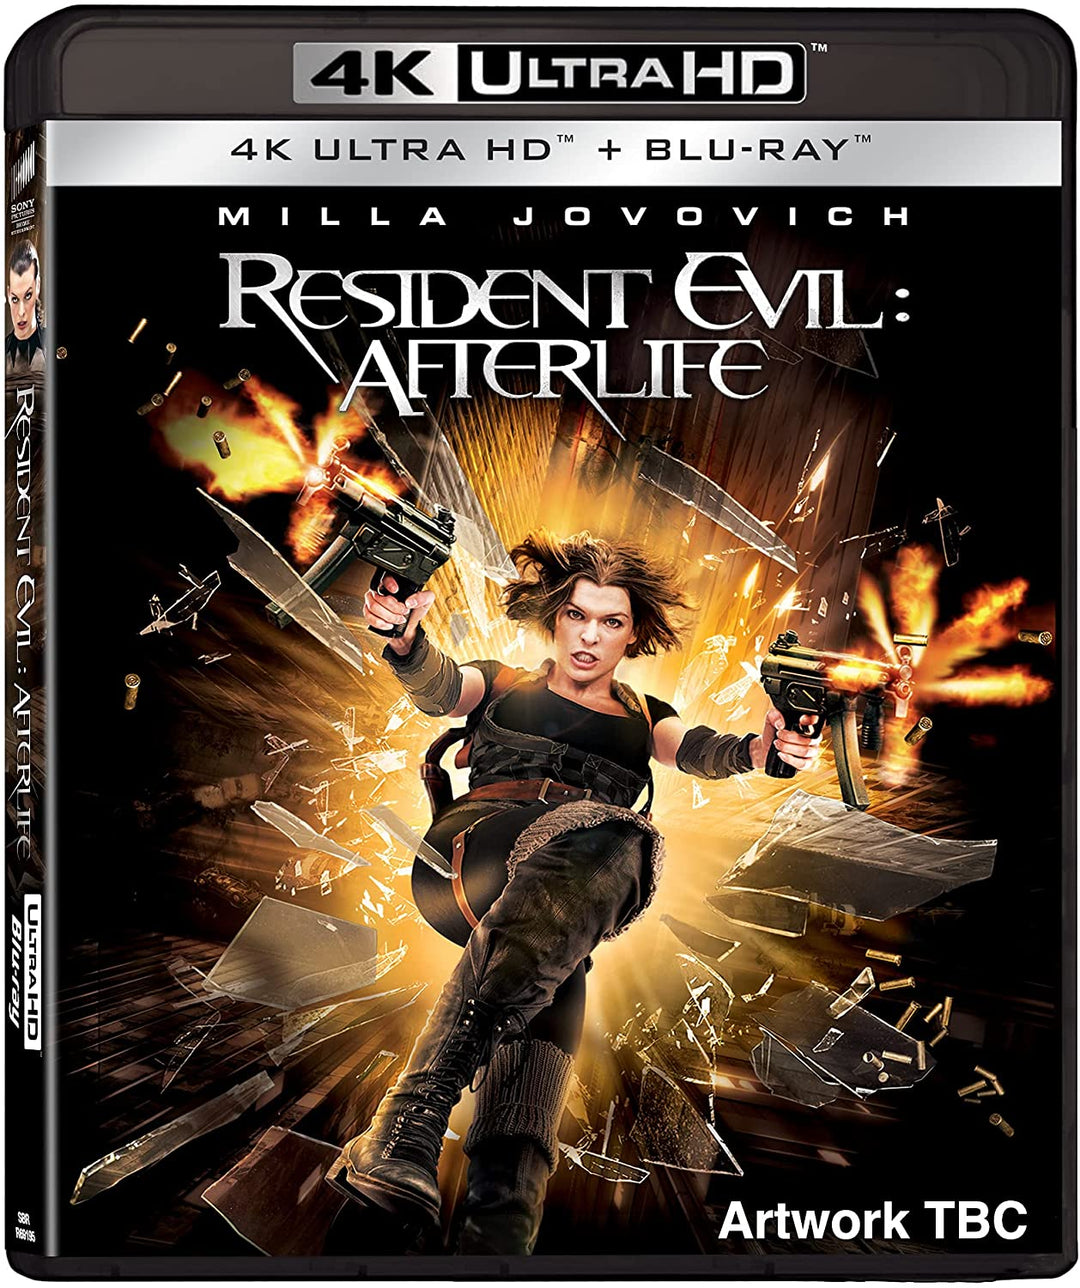 Resident Evil: Afterlife (2010) (2 Discs - UHD & BD) -  Action/Horror [Blu-ray]